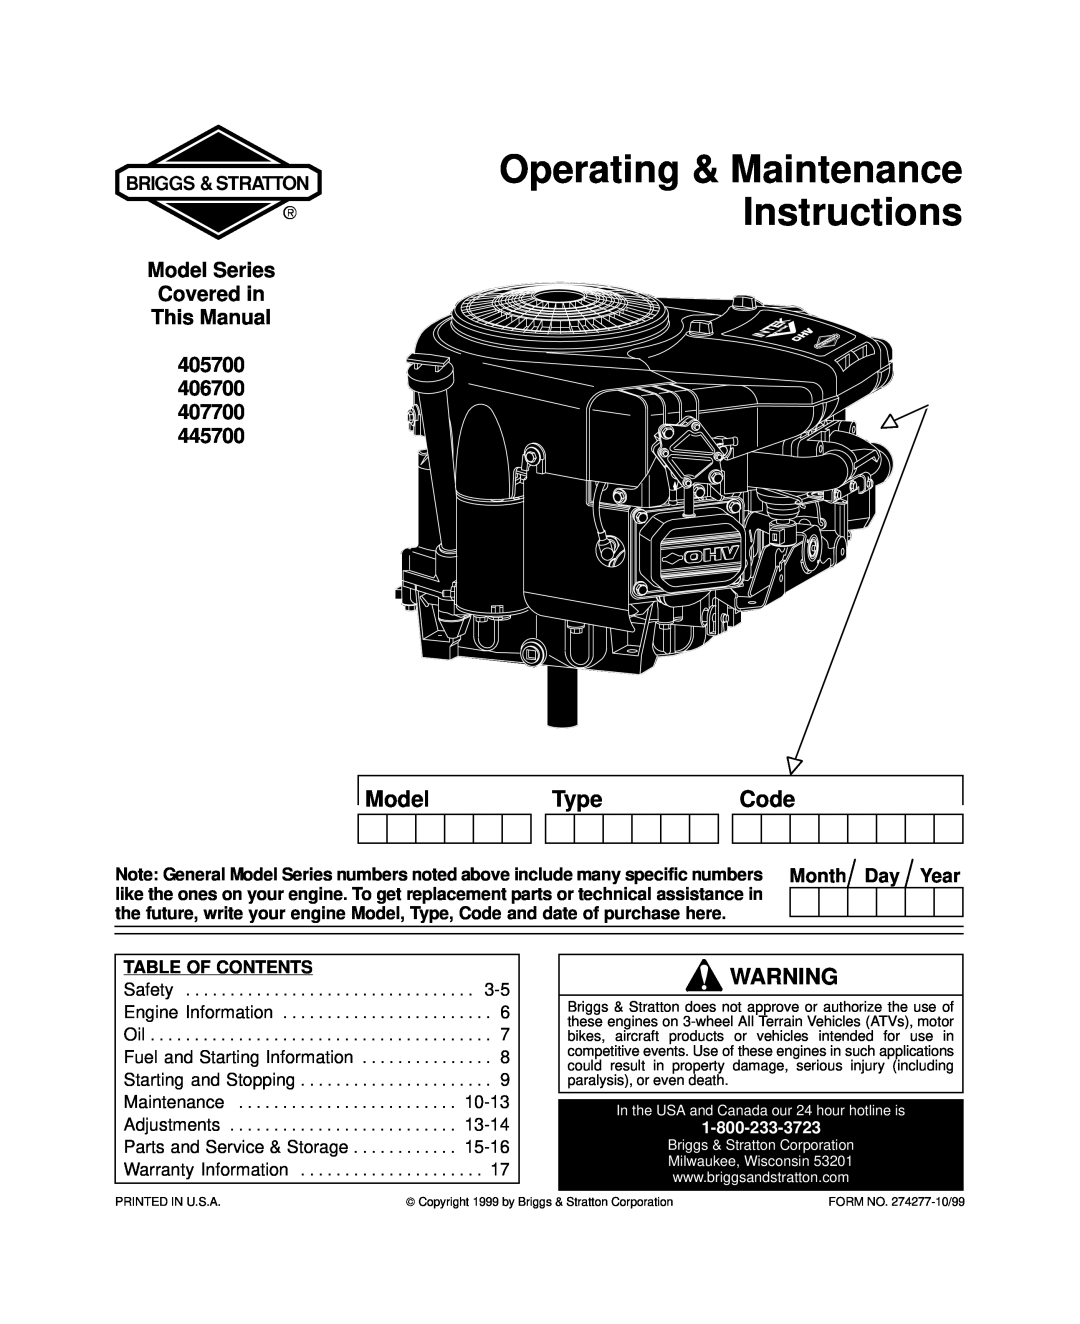 Briggs & Stratton 406700, 445700 warranty Model, Type, Code, Month Day Year, Table Of Contents, 407700 